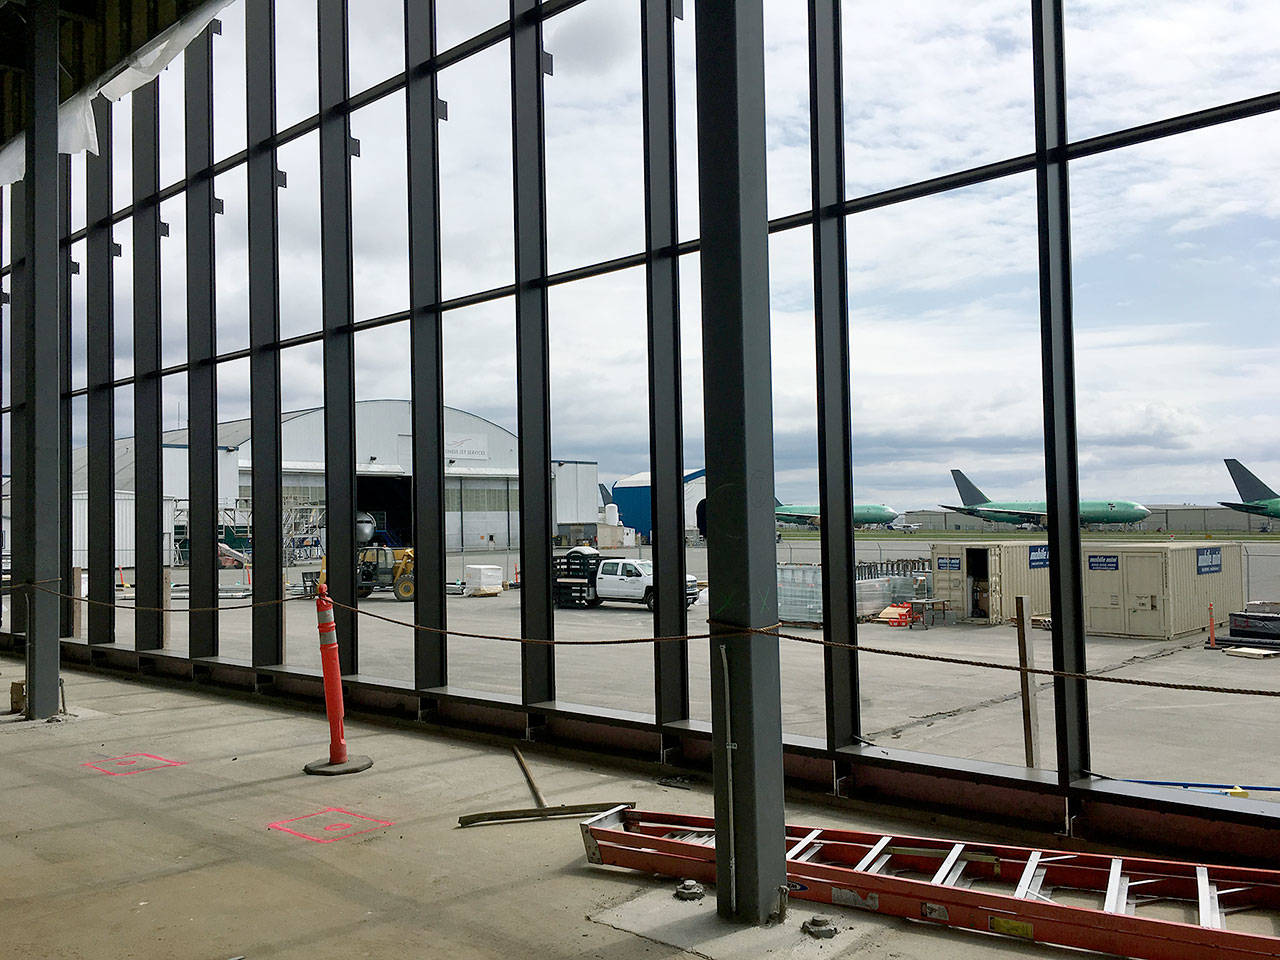 The passenger terminal at Paine Field in Everett features large windows that look out to the airport. (Janice Podsada / The Herald) PHOTO TAKEN 20180517